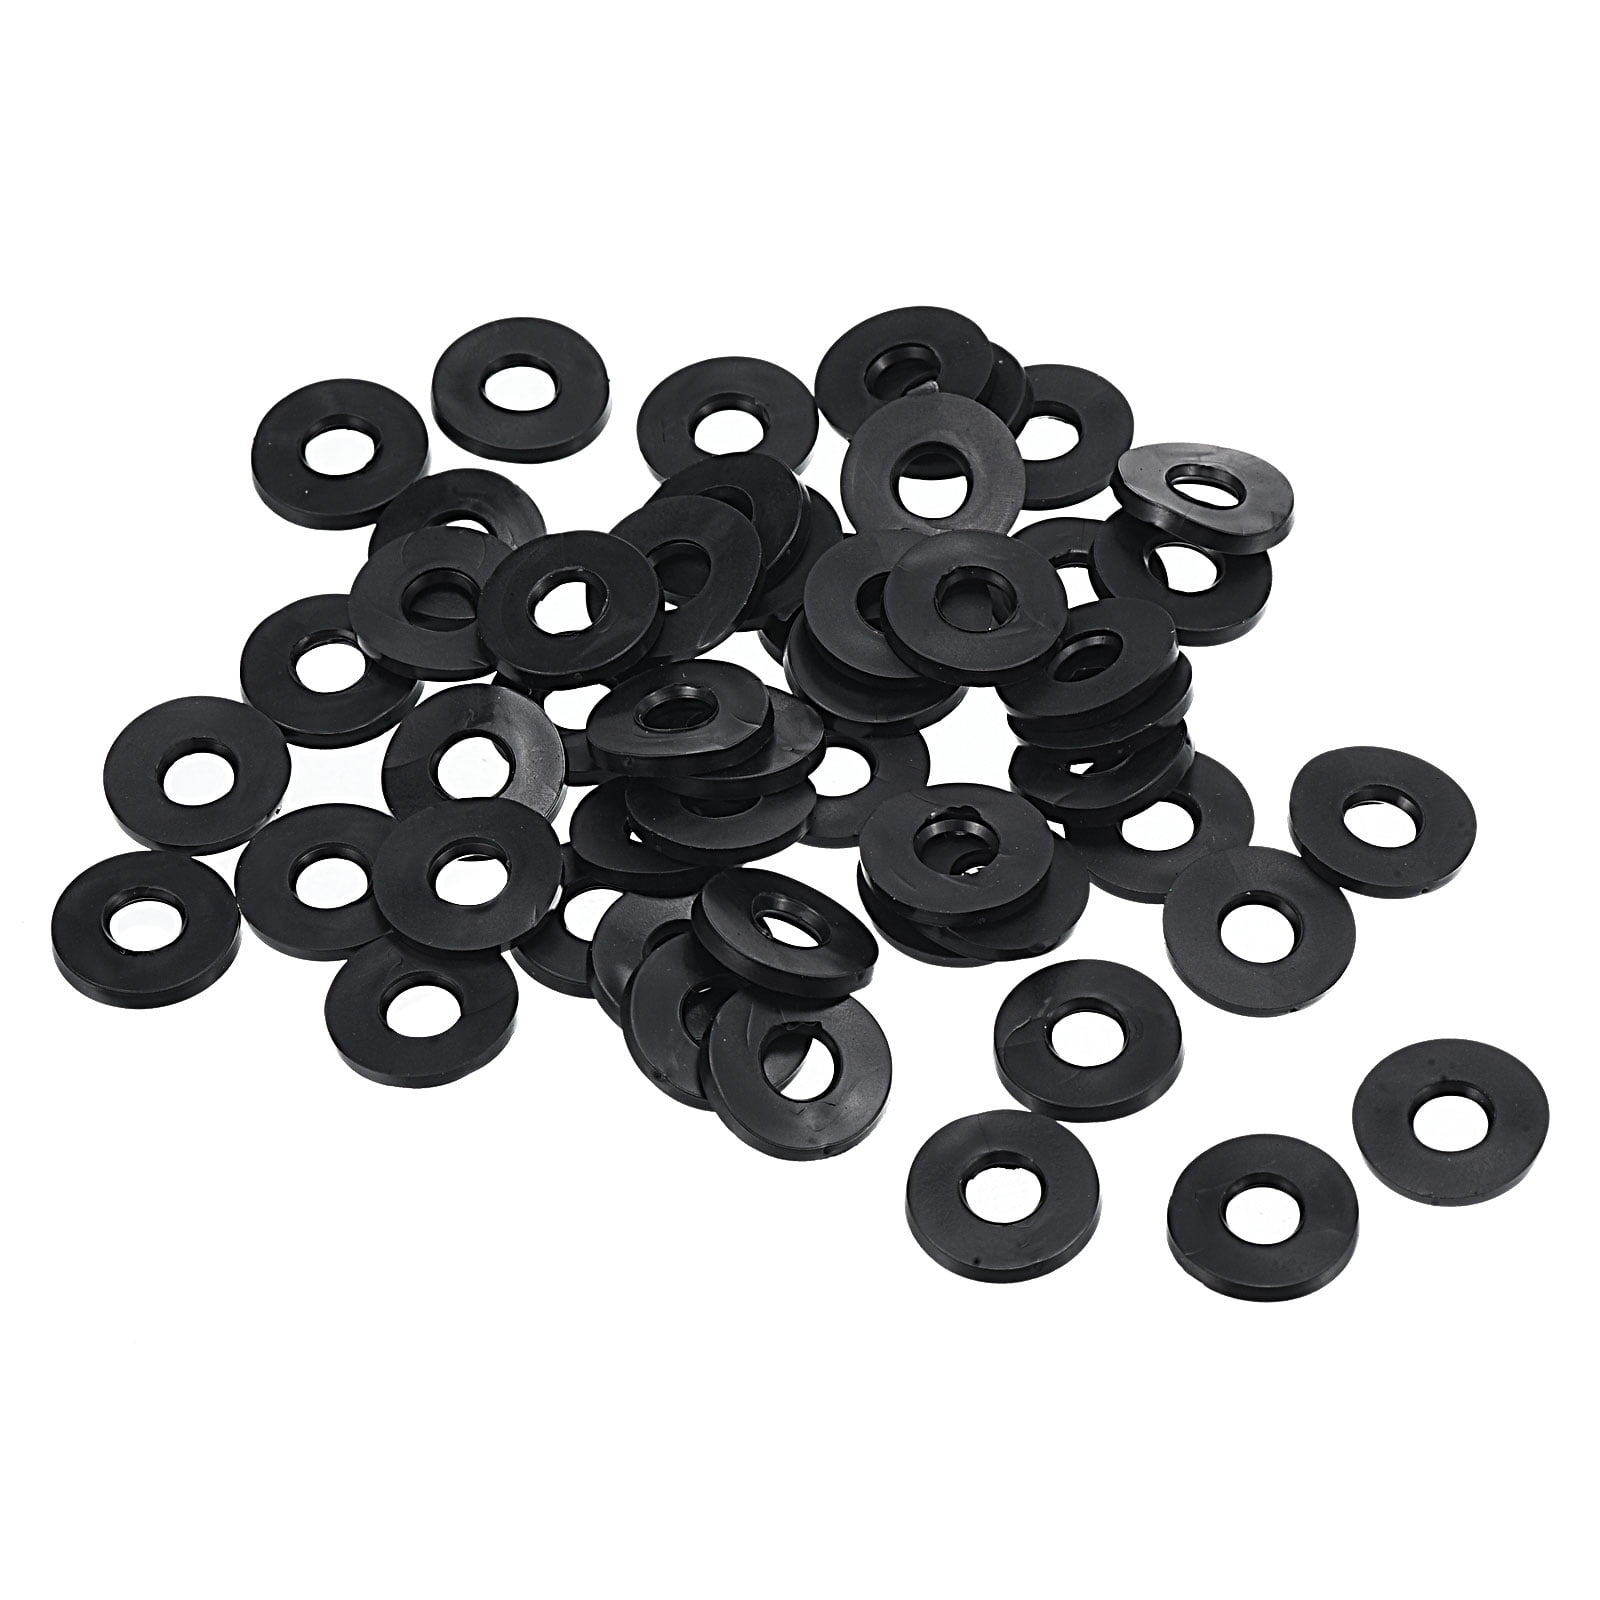 Flat Washer LUORNG 24pcs M6 16mm Outer Diameter 304 Stainless Steel Flat  Washer Adjustment Hardware Fitting Accessories Metal Plain Gasket for Bolts  